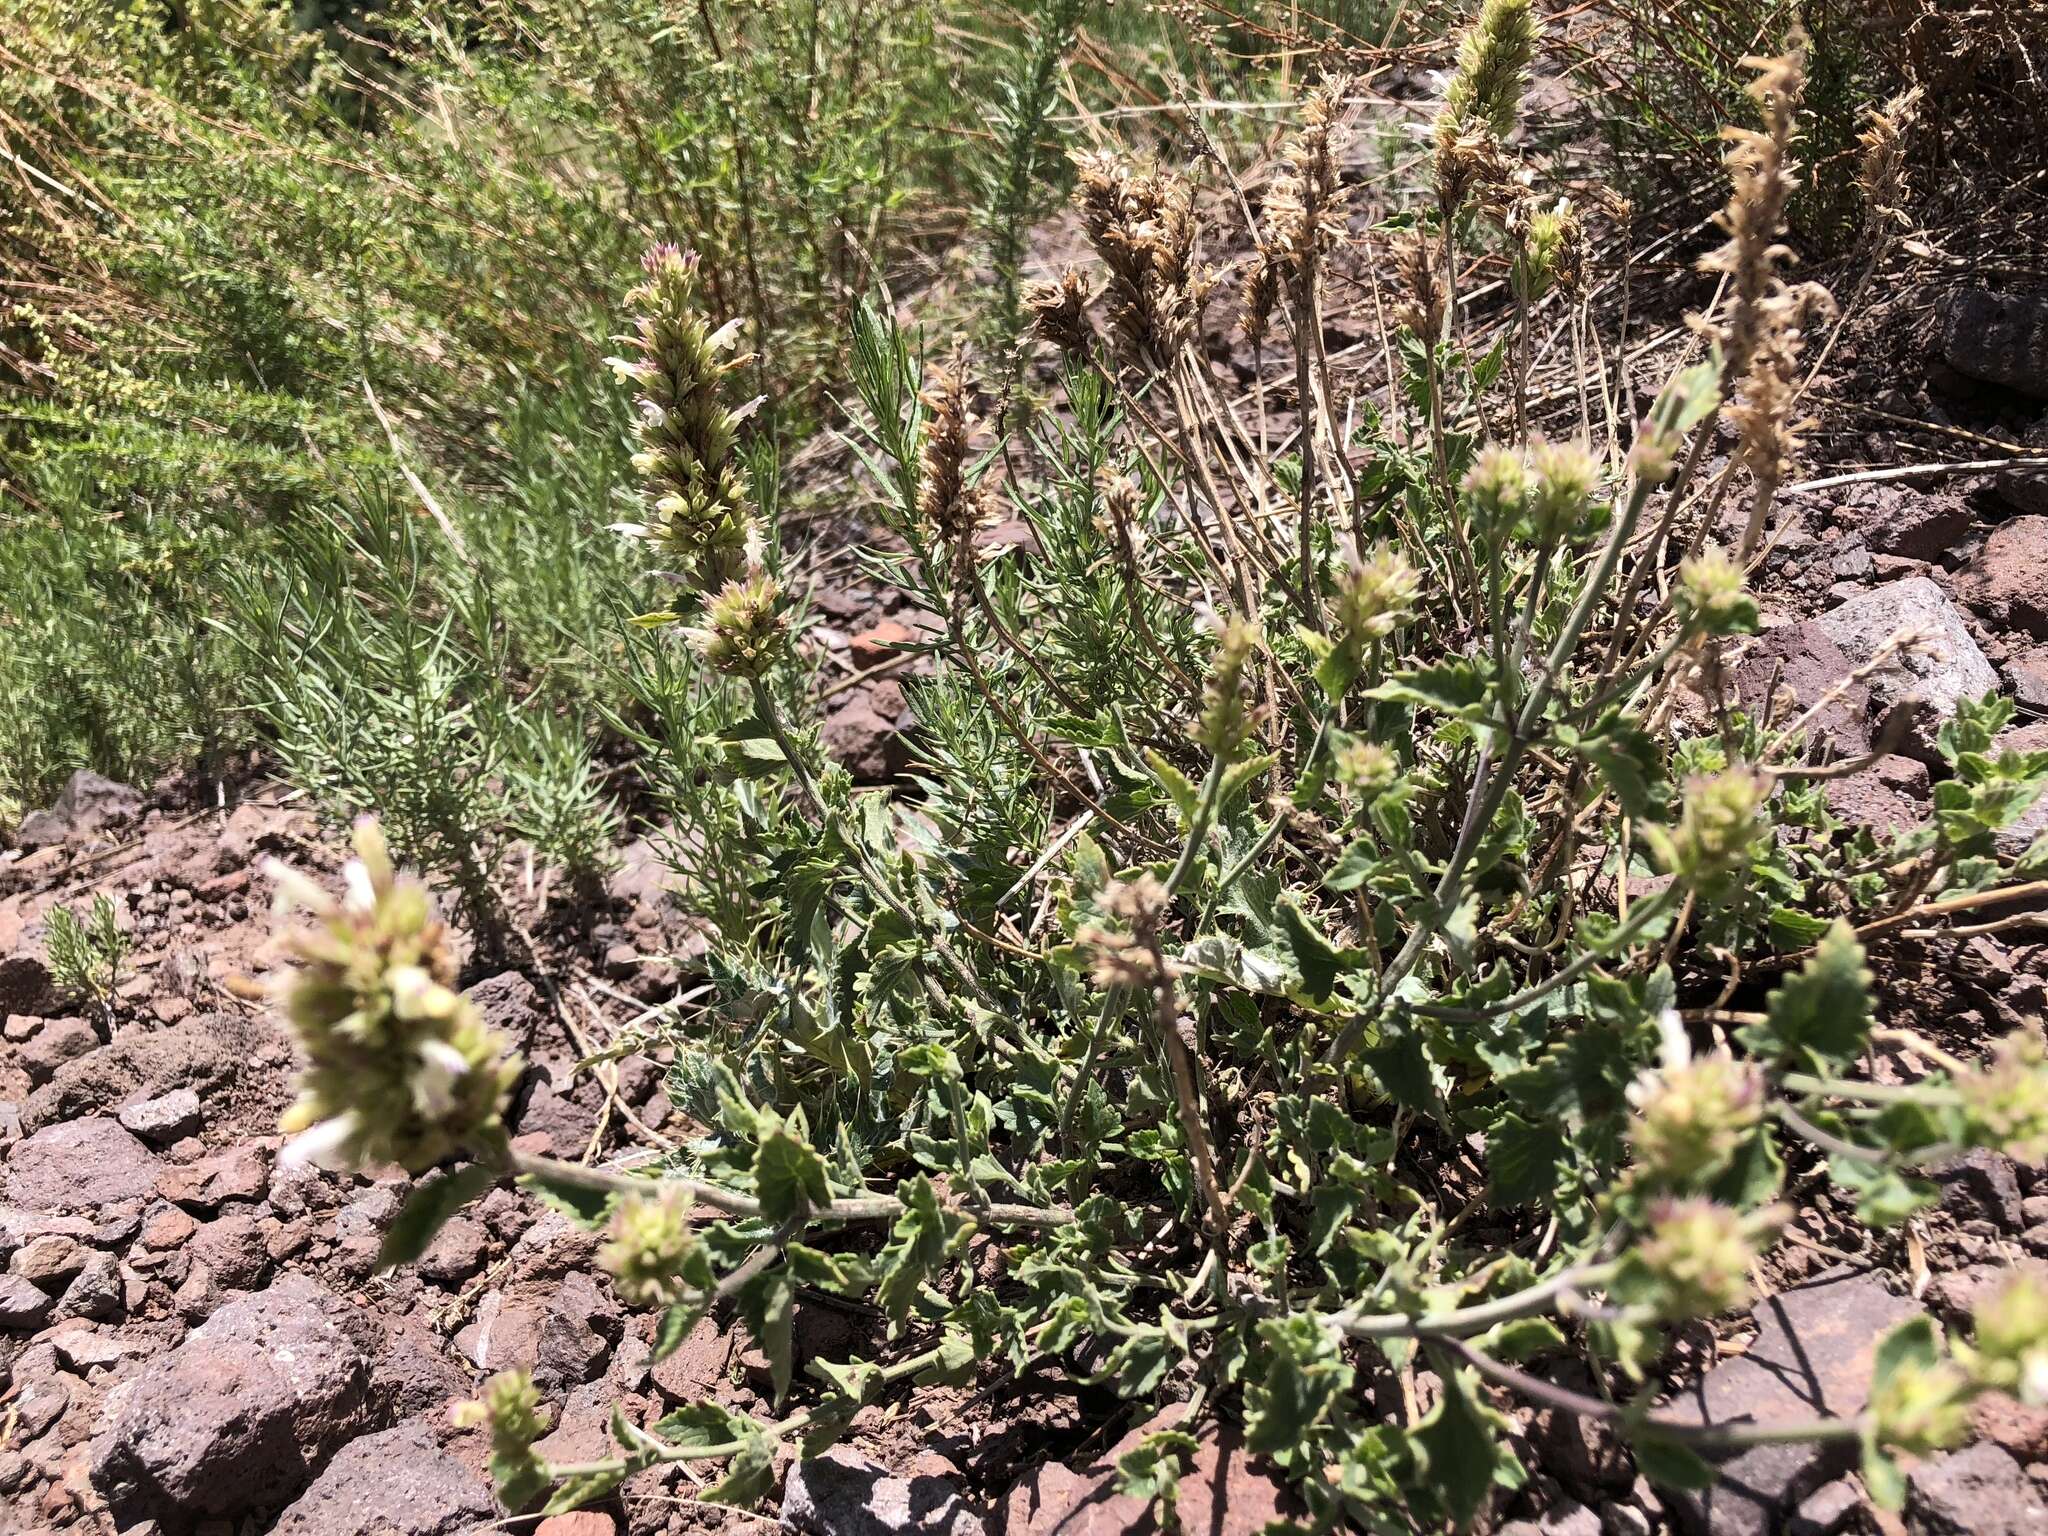 Image of Bill Williams Mountain giant hyssop